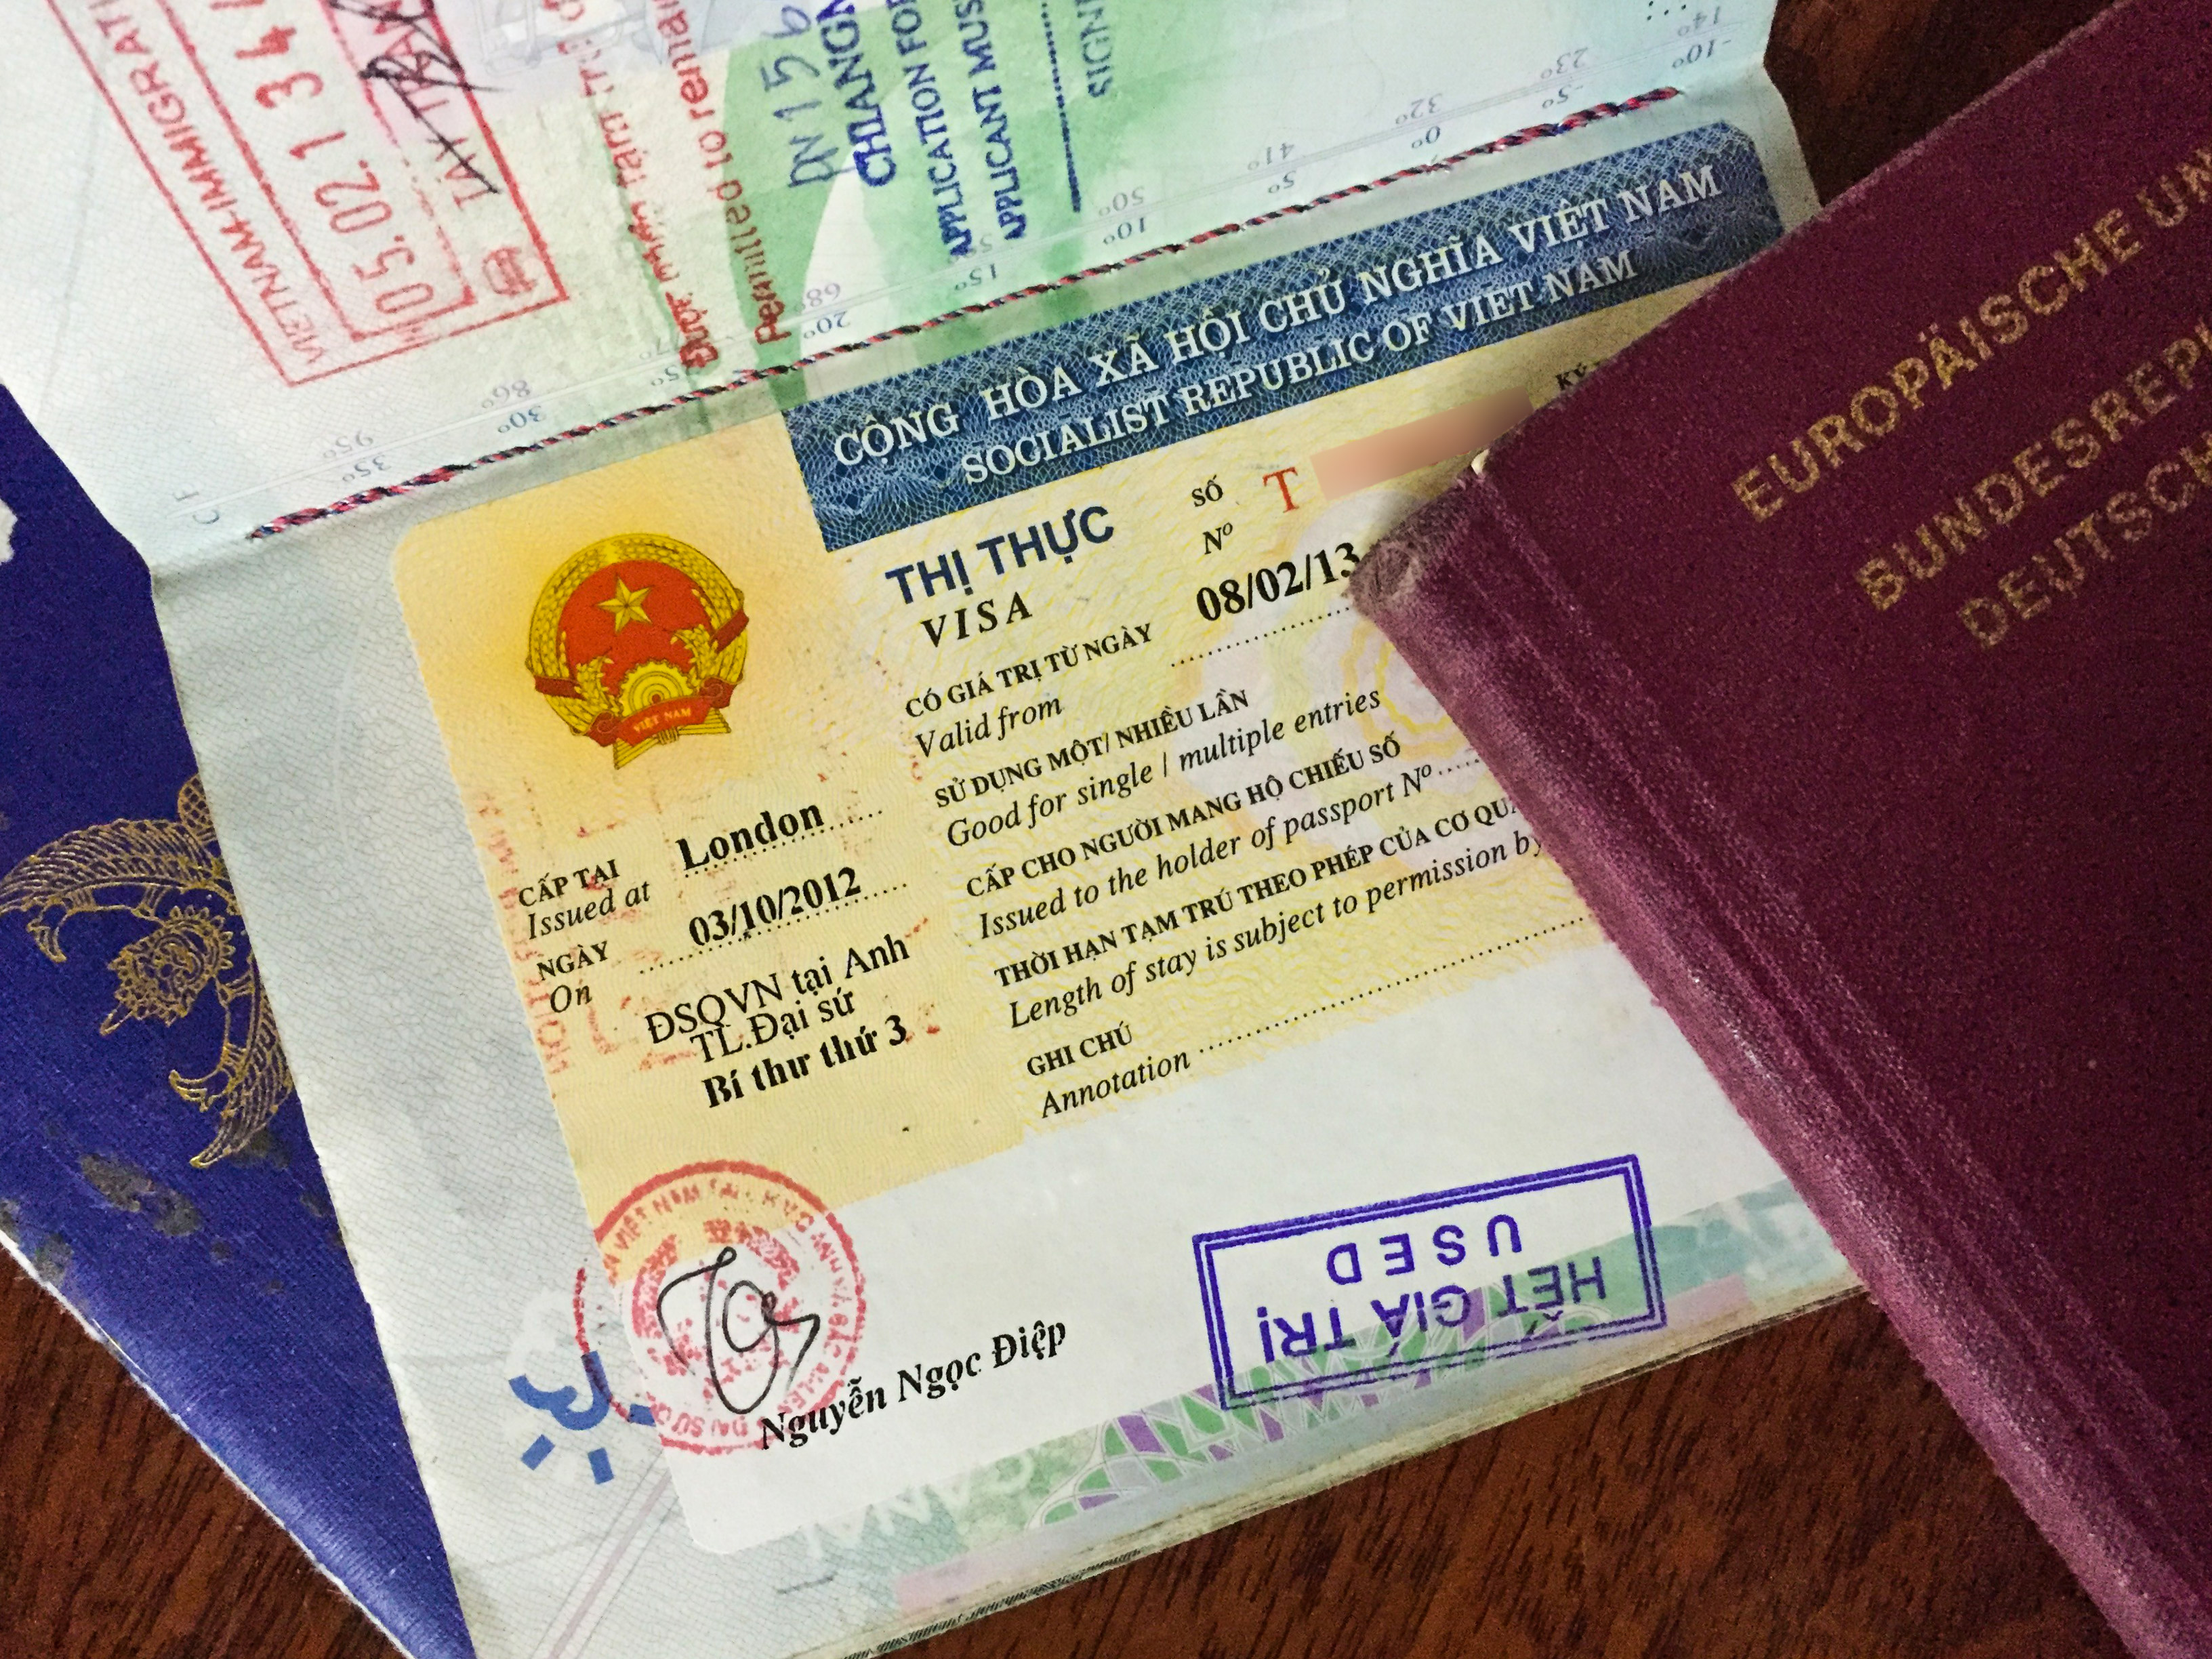 Getting Visa at Vietnam Embassy vs getting Visa On Arrival. Which one to choose?